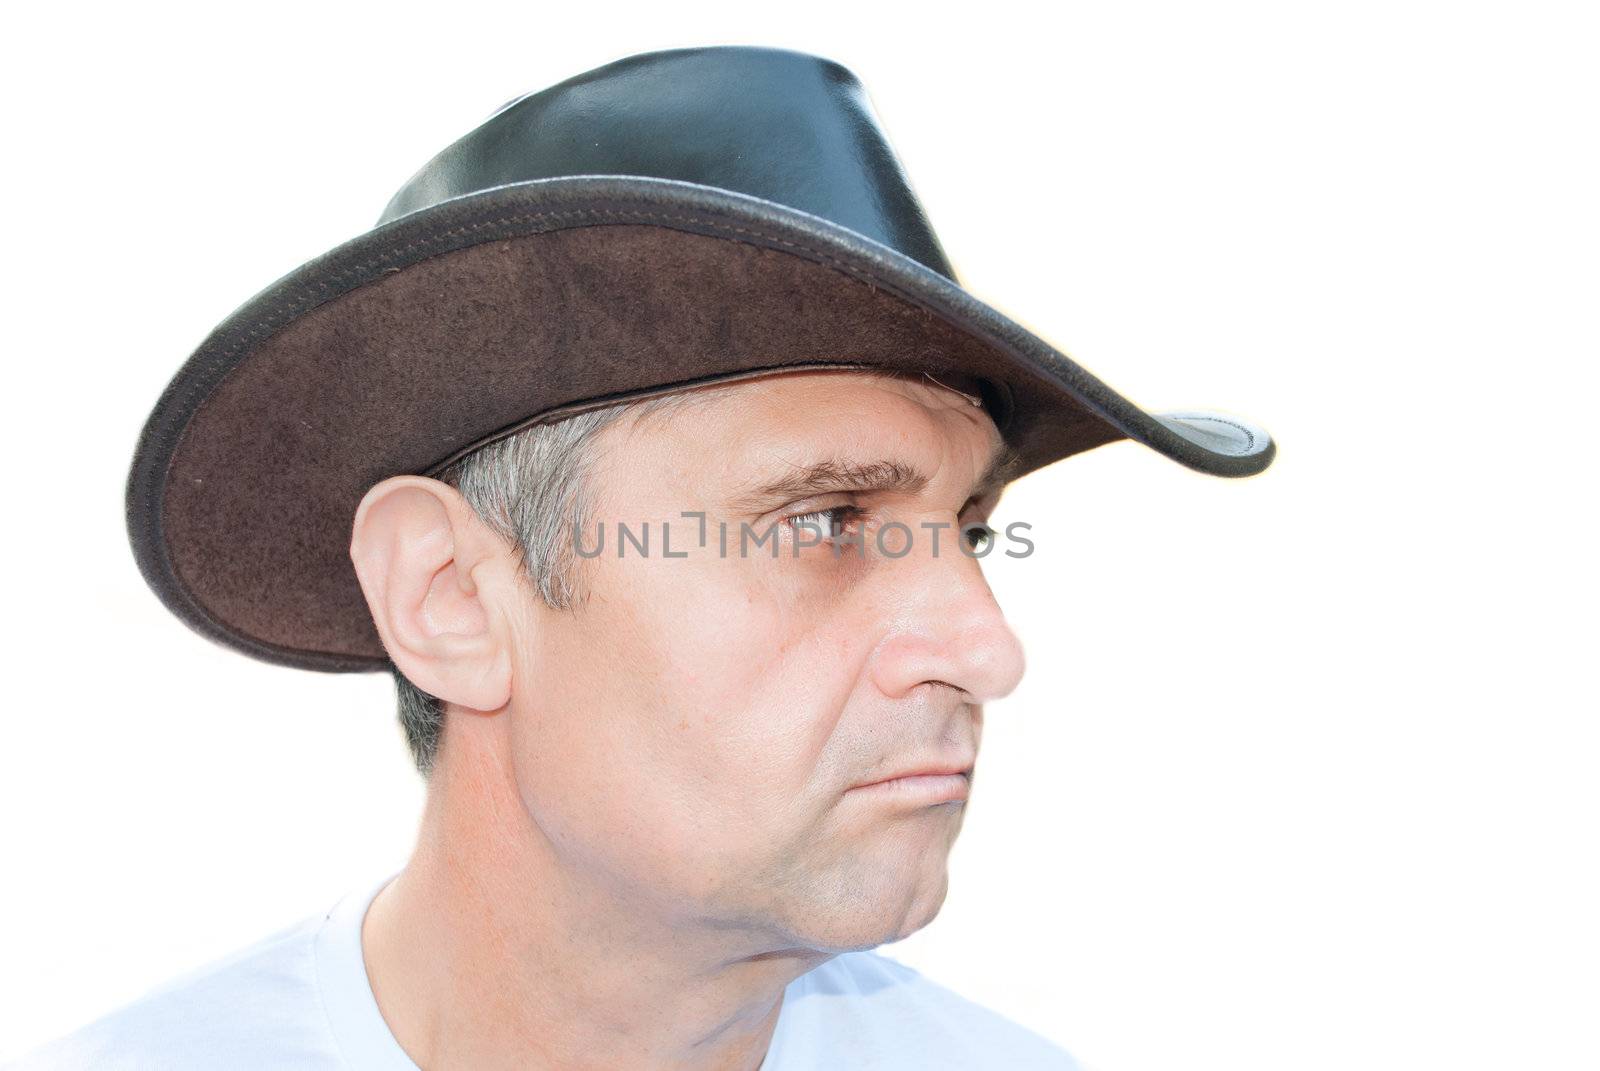 Man with cowboy hat by betterinall